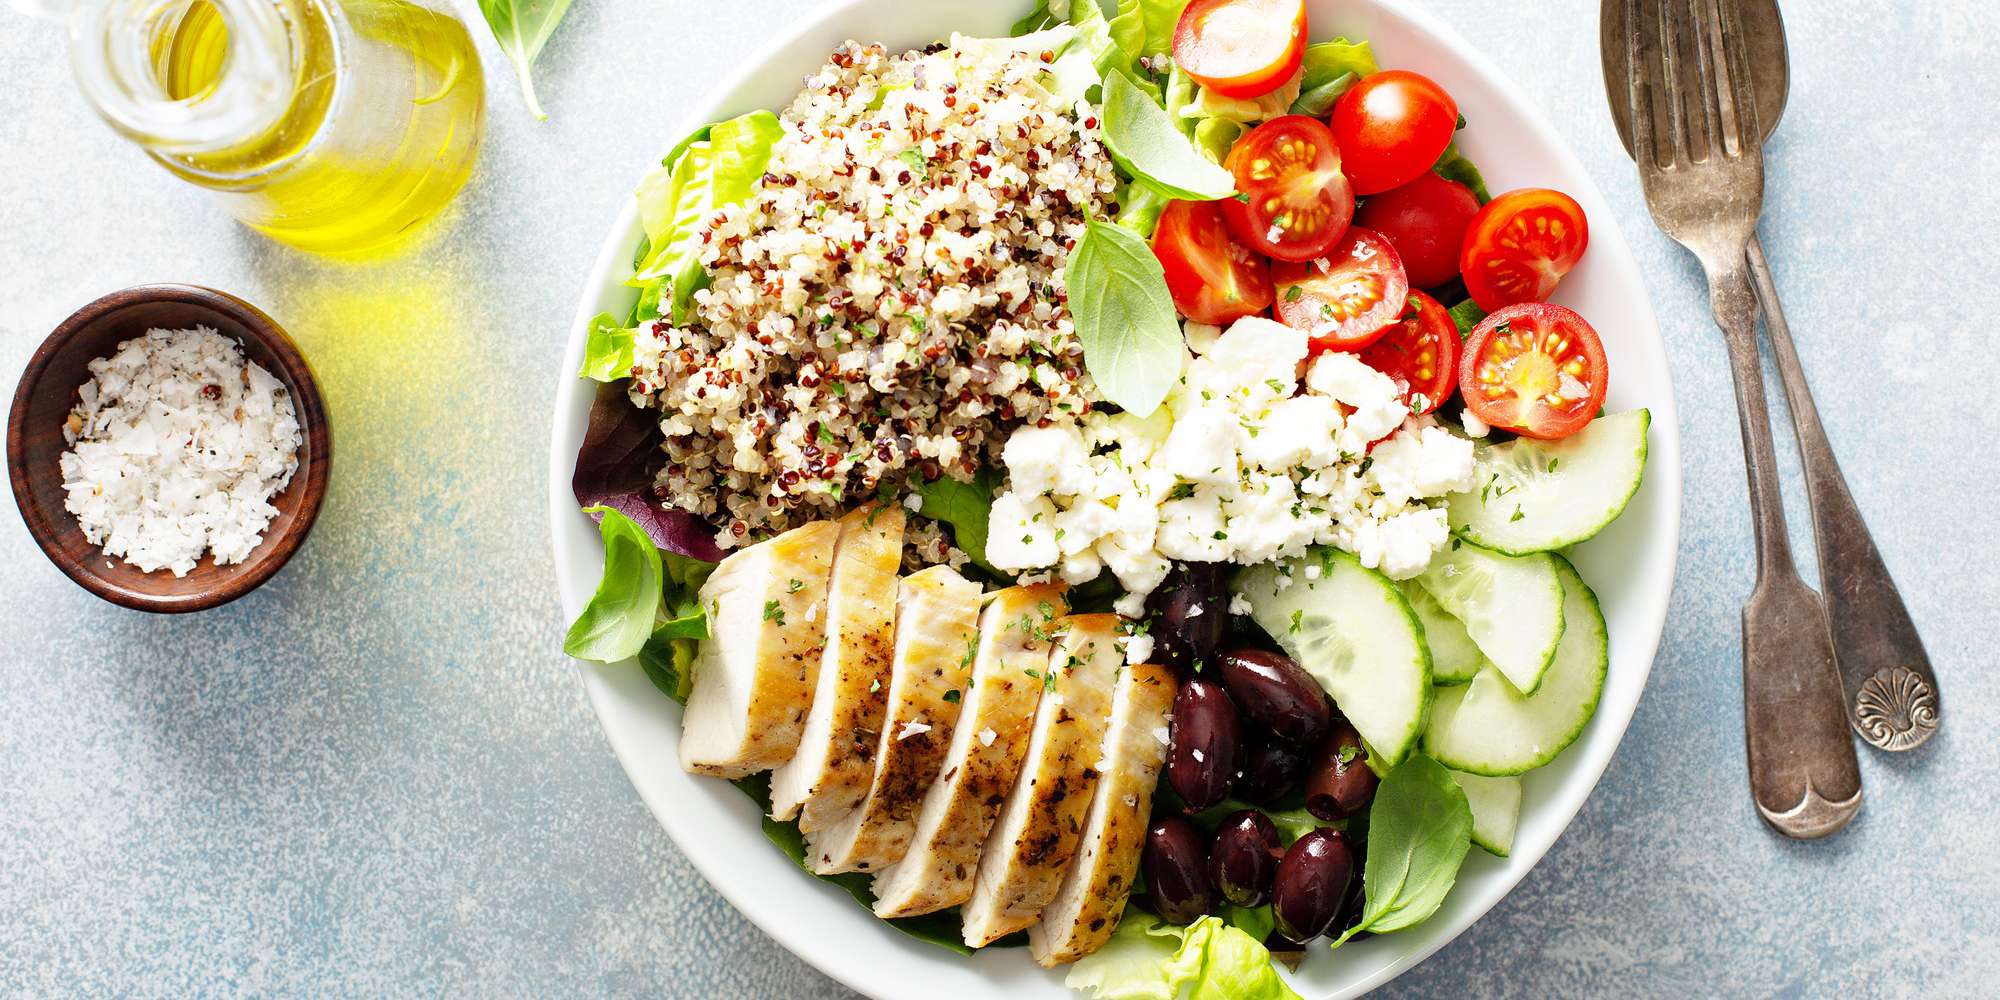 Greek Spinach Salad with Chicken or Kidney Beans